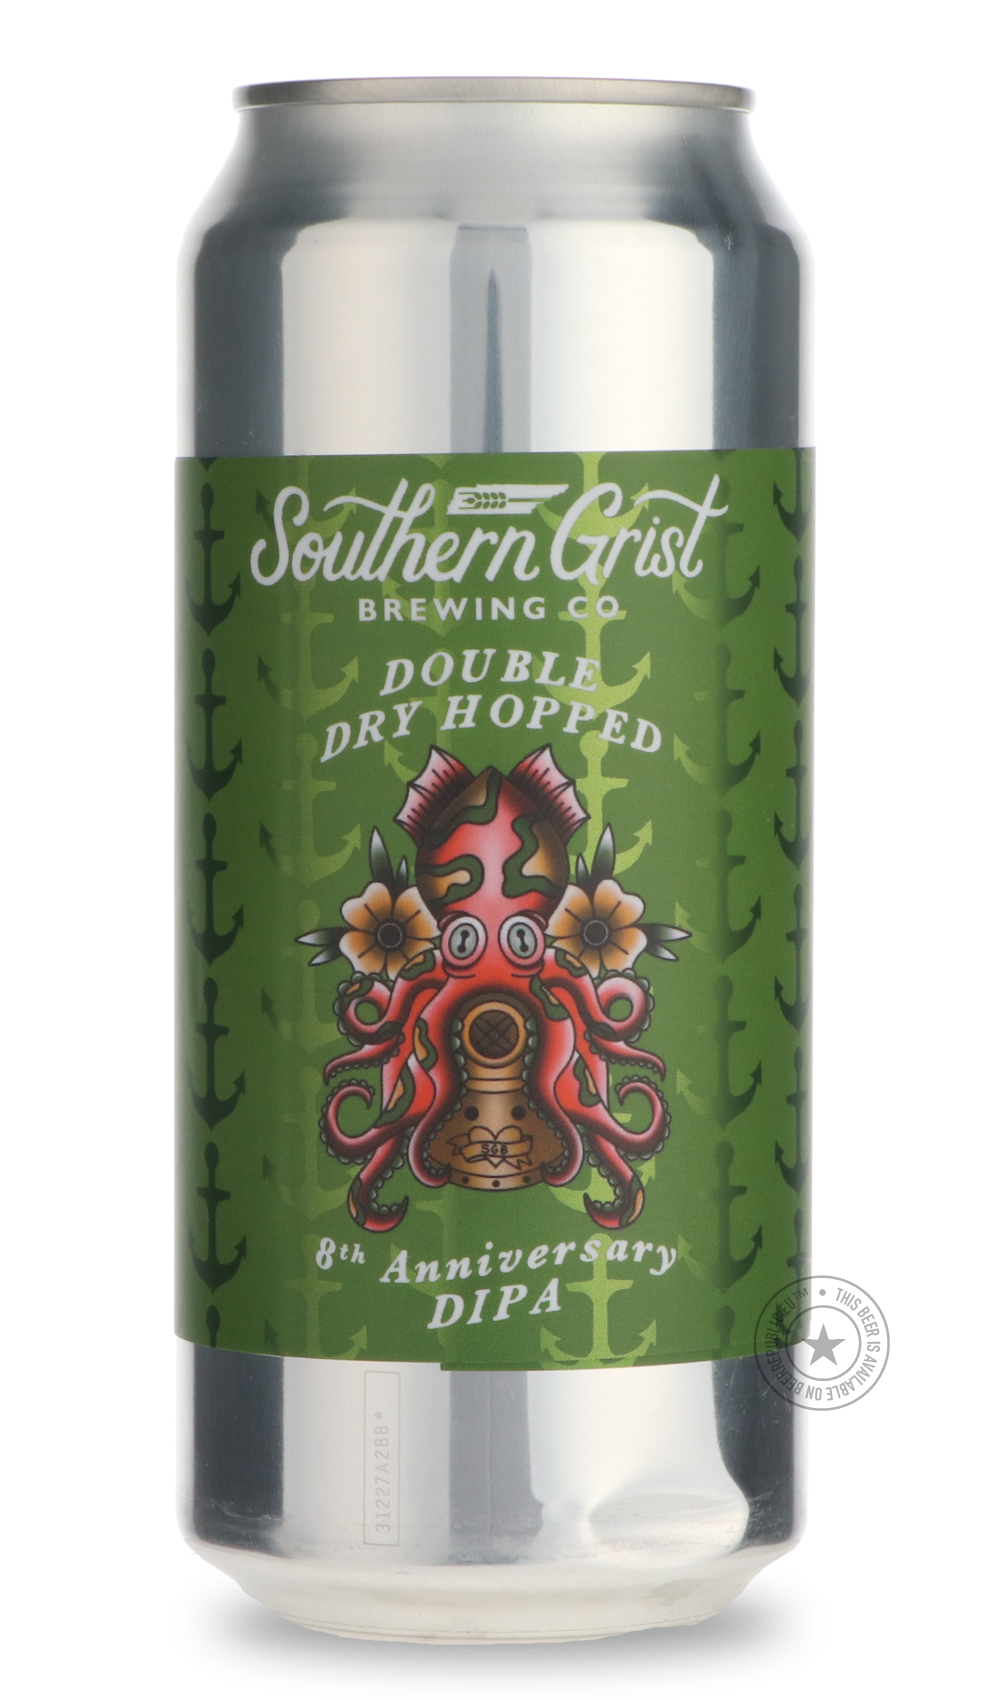 -Southern Grist- 8th Anniversary DIPA-IPA- Only @ Beer Republic - The best online beer store for American & Canadian craft beer - Buy beer online from the USA and Canada - Bier online kopen - Amerikaans bier kopen - Craft beer store - Craft beer kopen - Amerikanisch bier kaufen - Bier online kaufen - Acheter biere online - IPA - Stout - Porter - New England IPA - Hazy IPA - Imperial Stout - Barrel Aged - Barrel Aged Imperial Stout - Brown - Dark beer - Blond - Blonde - Pilsner - Lager - Wheat - Weizen - Amb